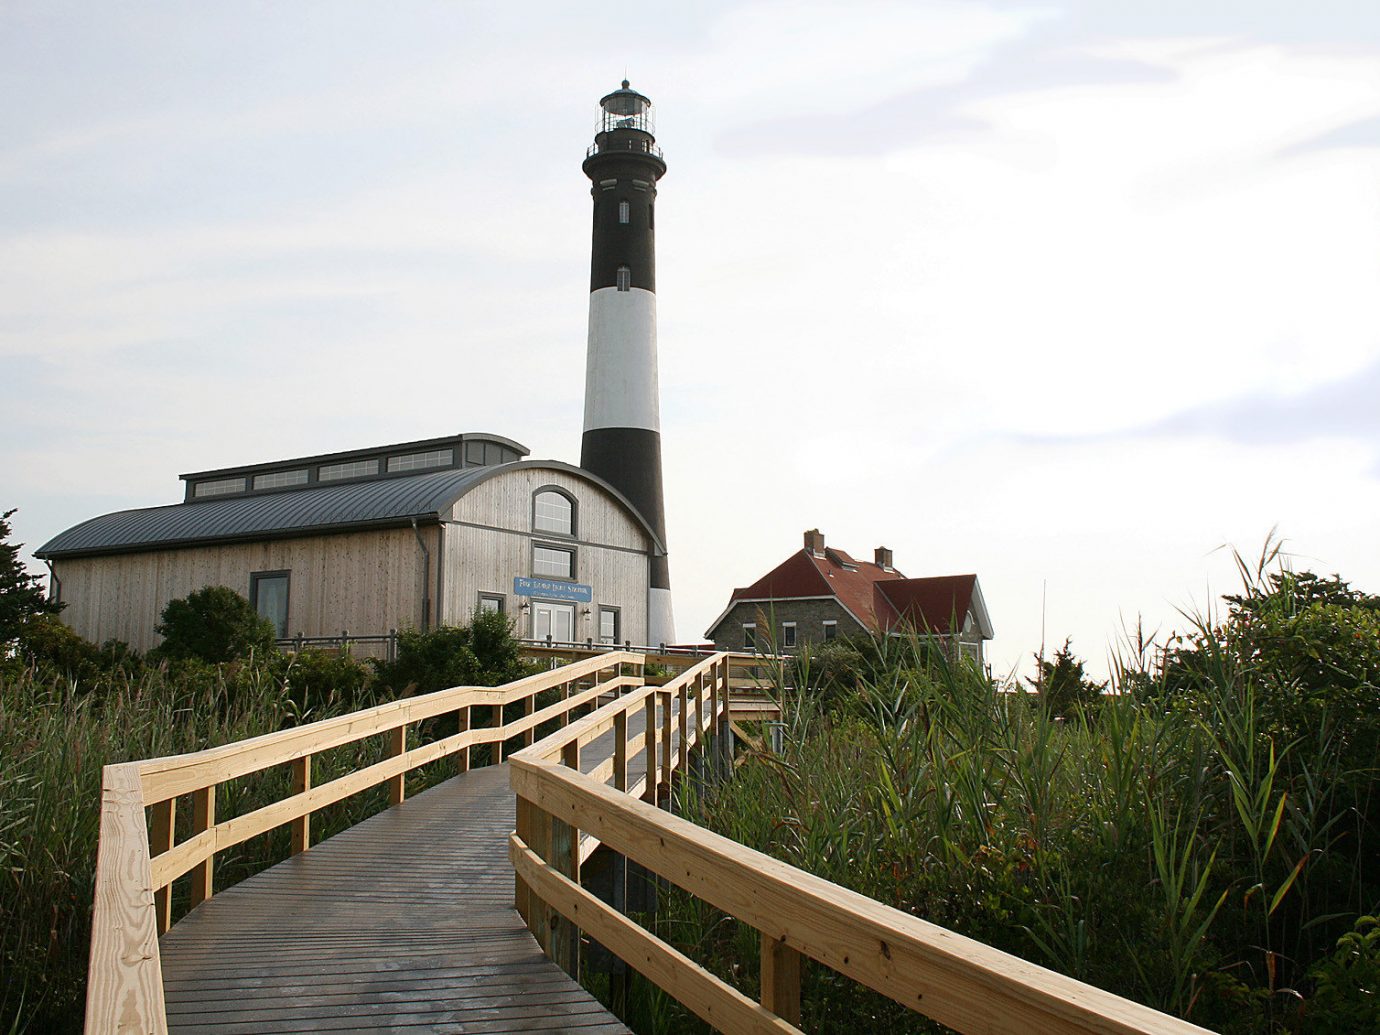 boardwalk Buildings Fog Greenery isolation lighthouse remote Scenic views Trip Ideas view outdoor sky tree building tower wooden waterway Coast walkway stone